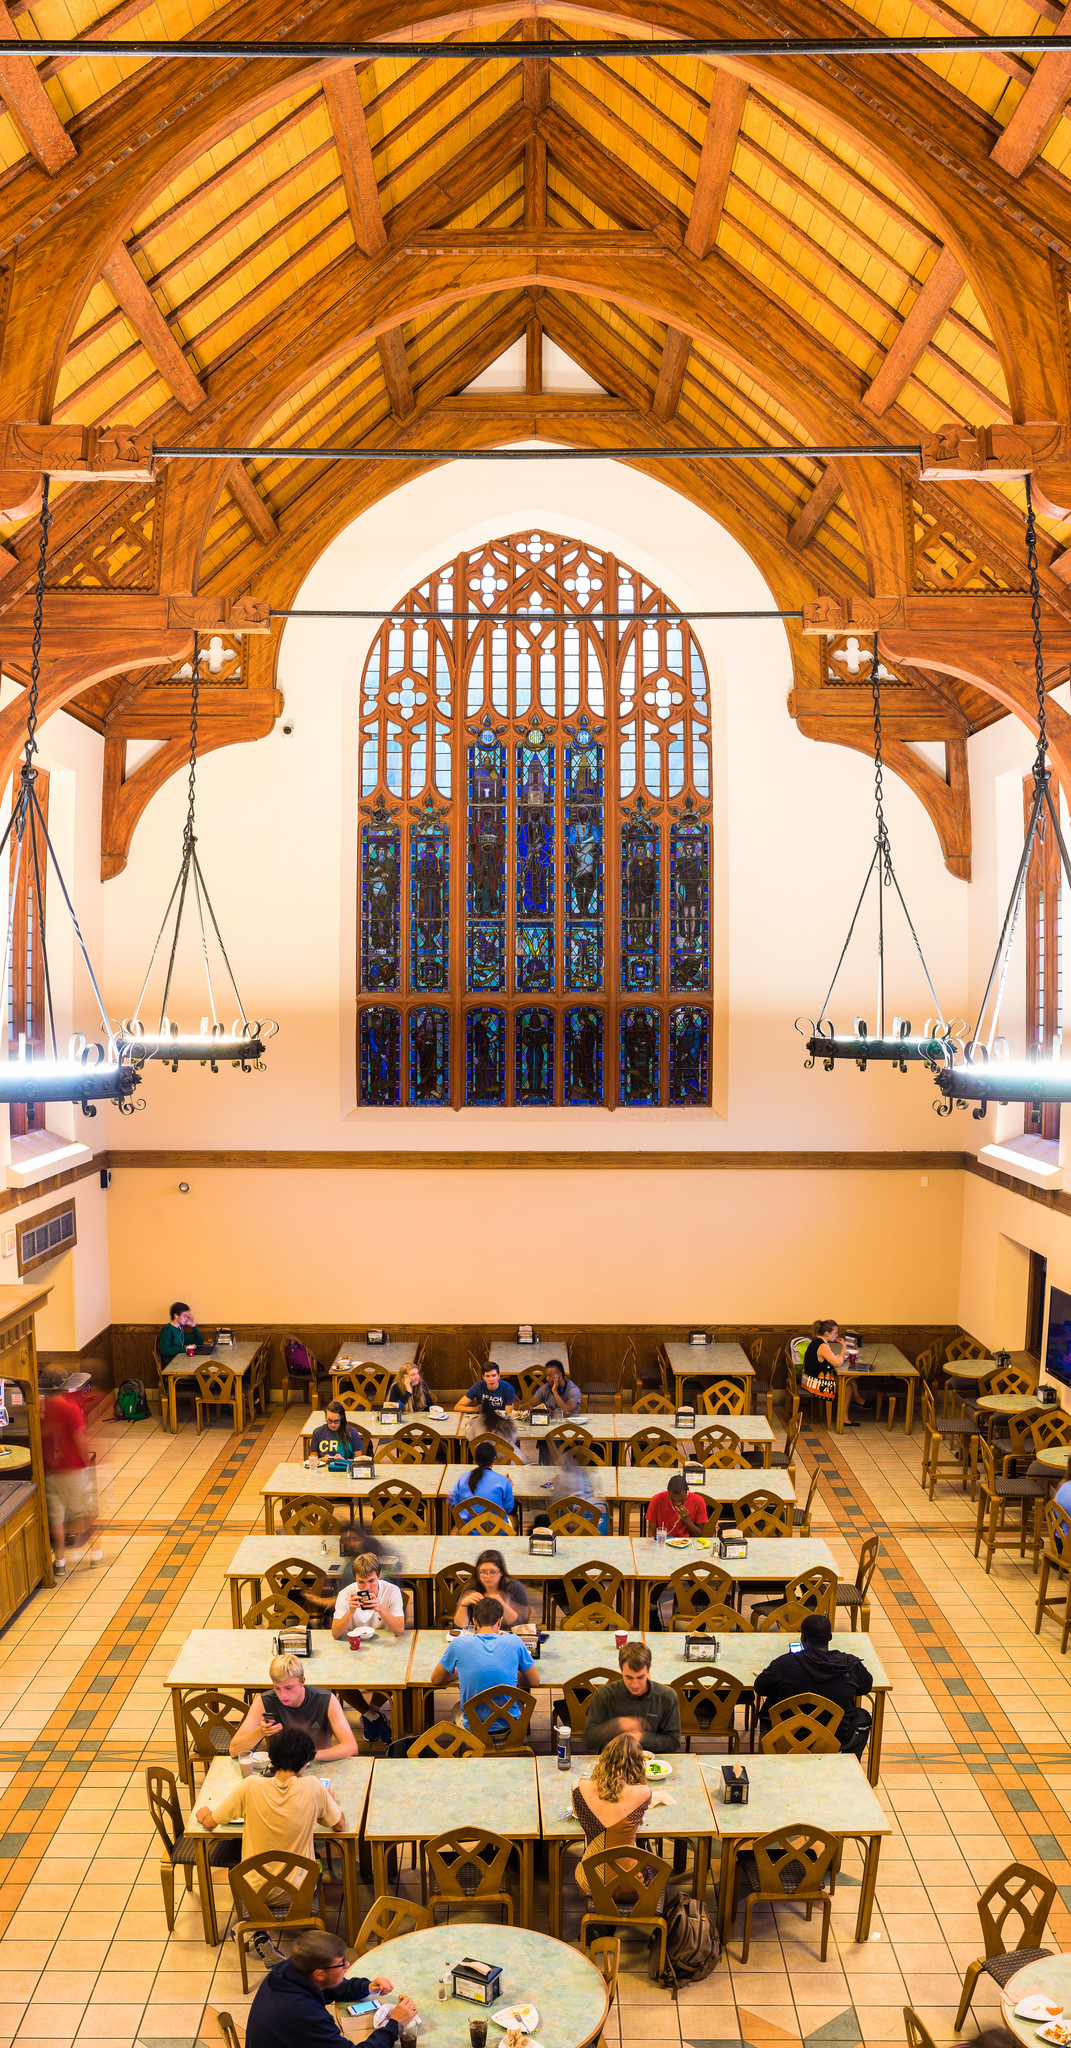 Georgia Tech's Brittain Dining Hall tops Southern Living list of most stunning college dining halls in the South. One of Britain’s highlights is the large stained glass window designed by Julian Harris.The window was dedicated to Georgia Tech graduating classes of 1928-1932.